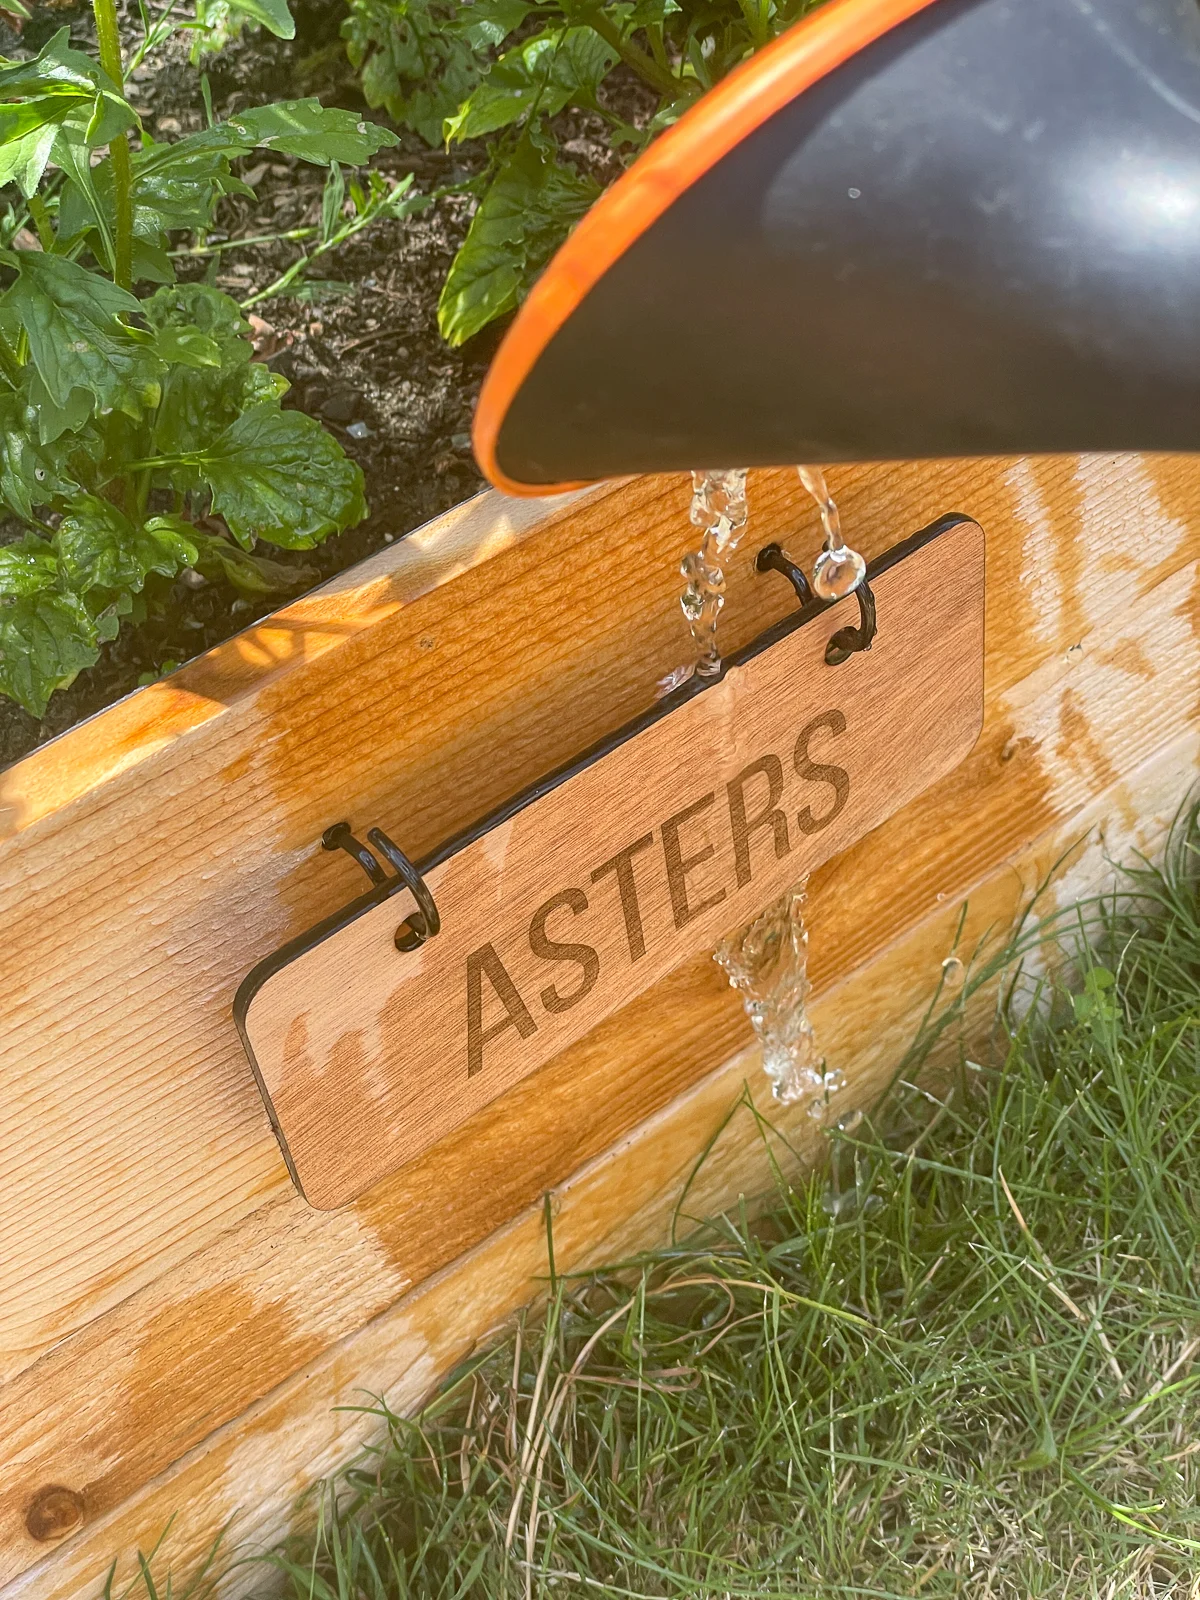 DIY garden label getting wet from watering can